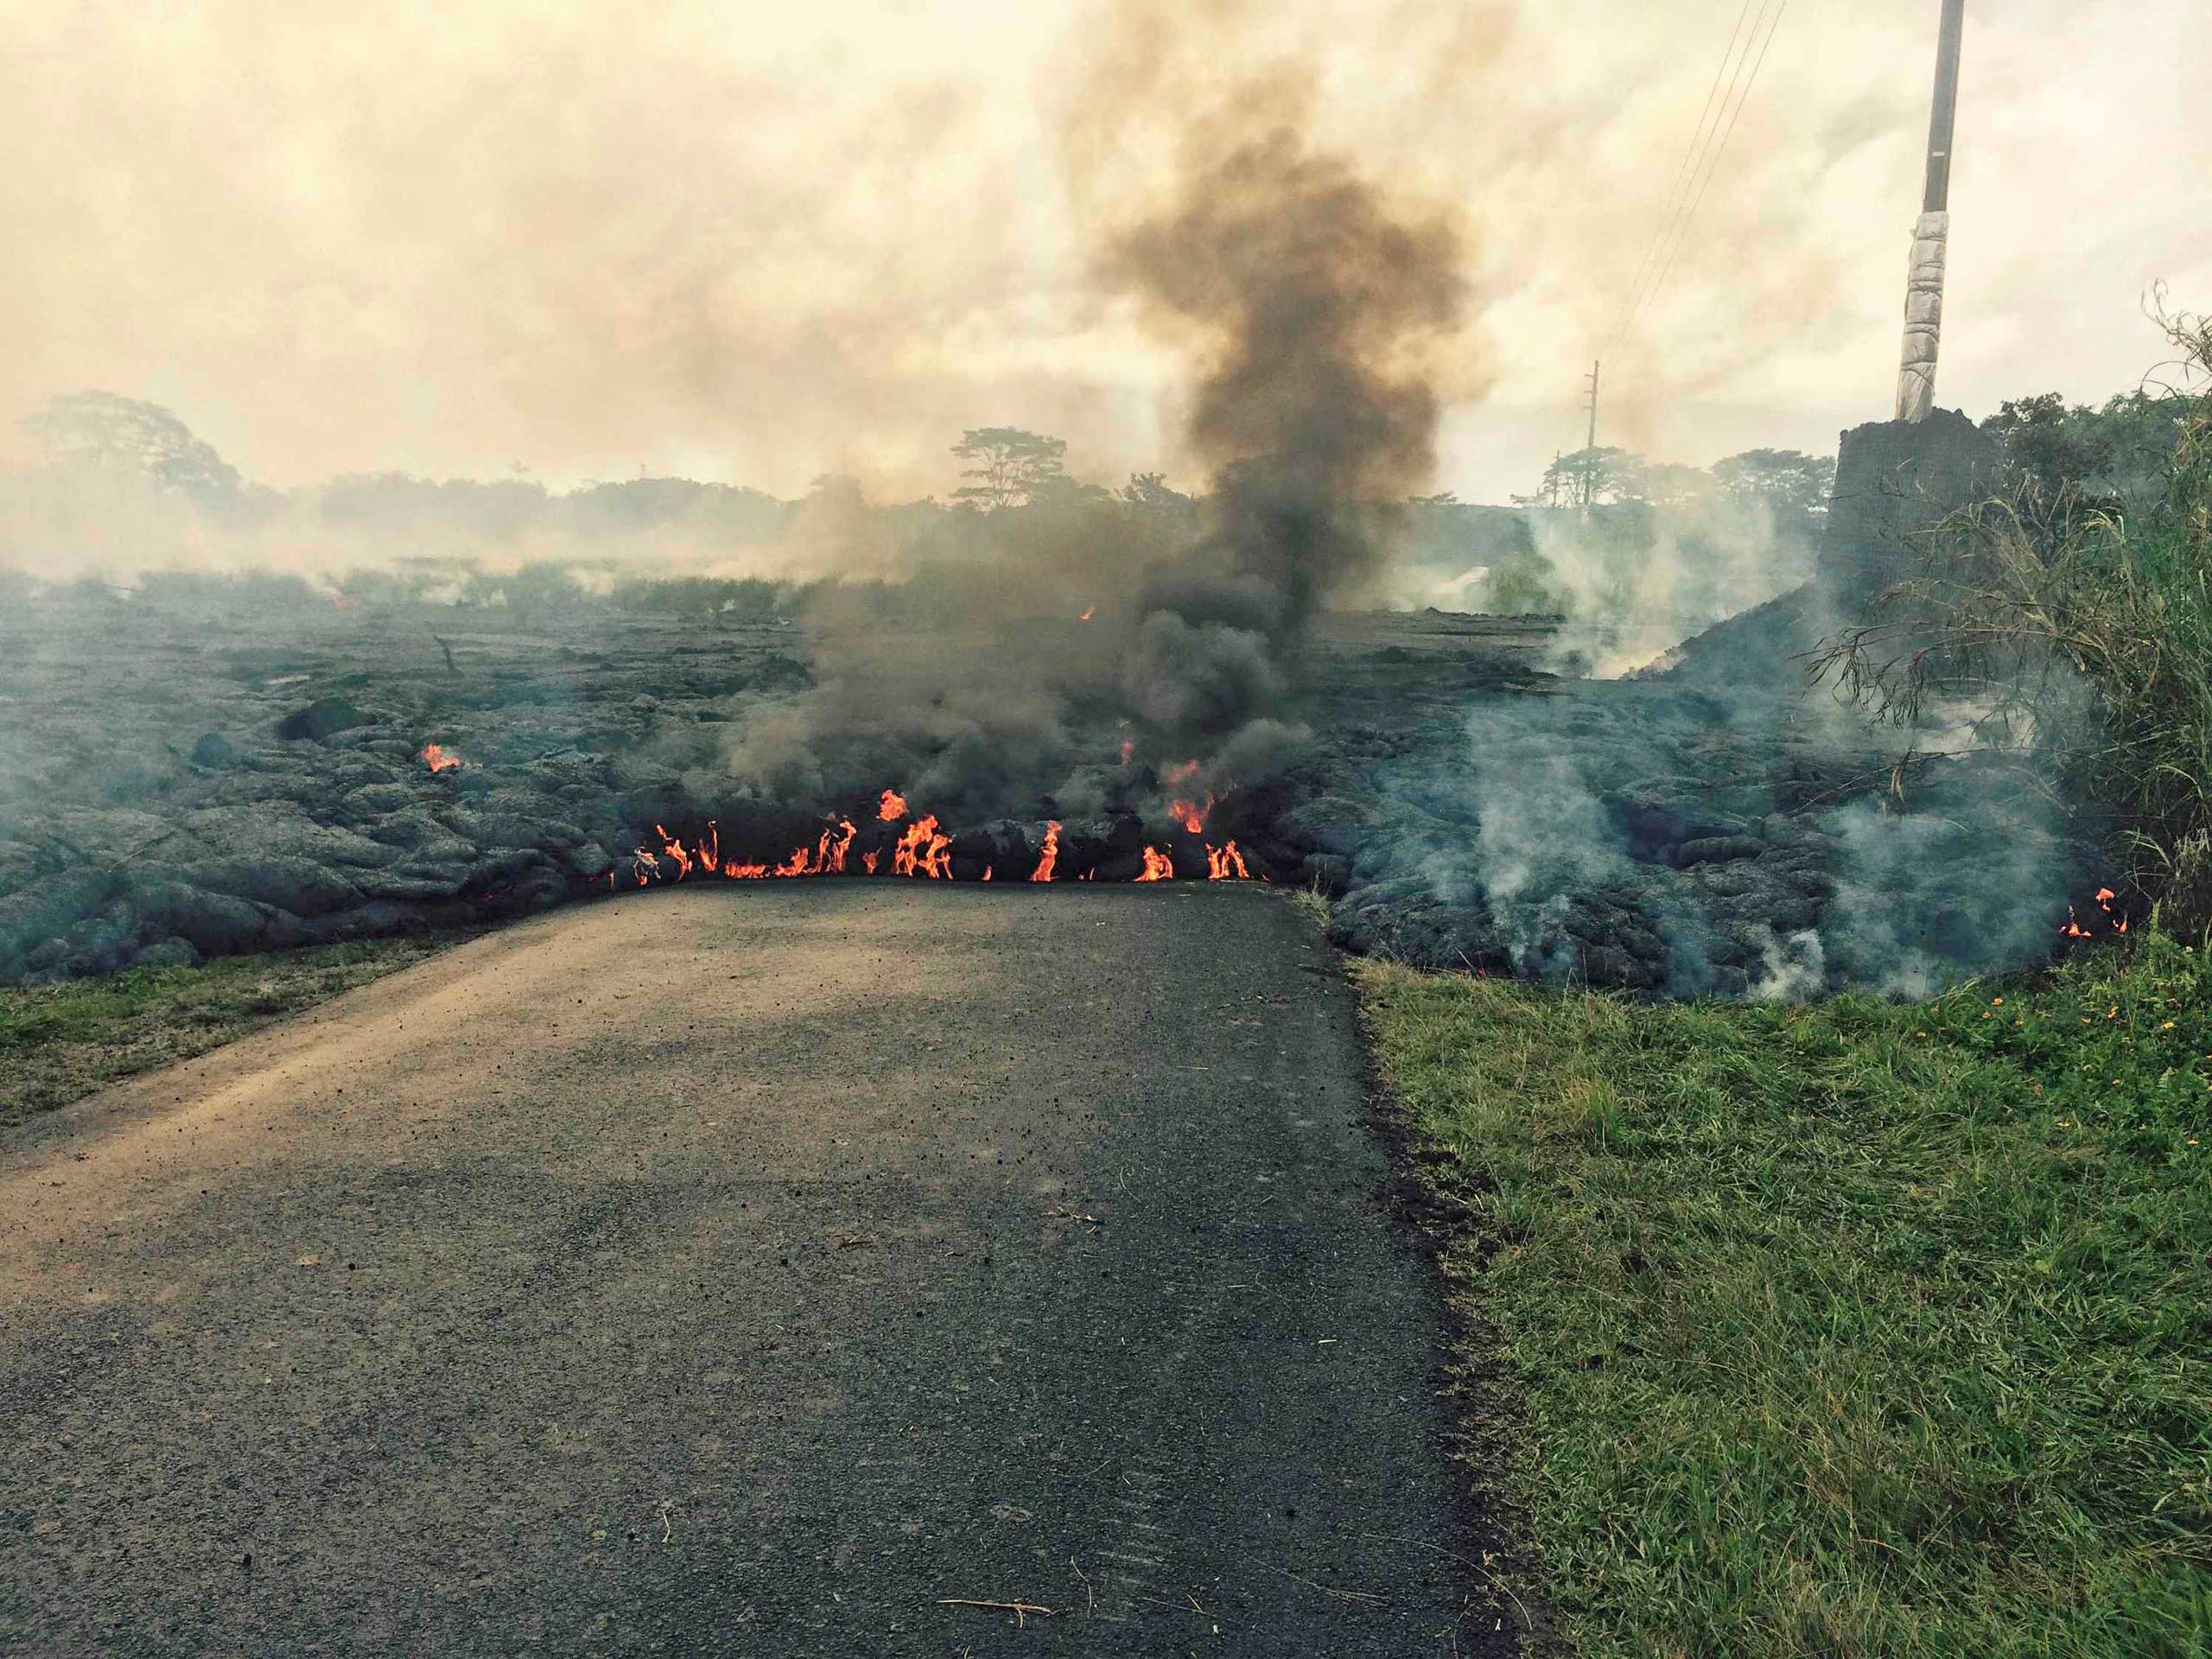 The lava flow from the Kalauea Volcano is seen crossing a road near the village of Pahoa, Hawaii